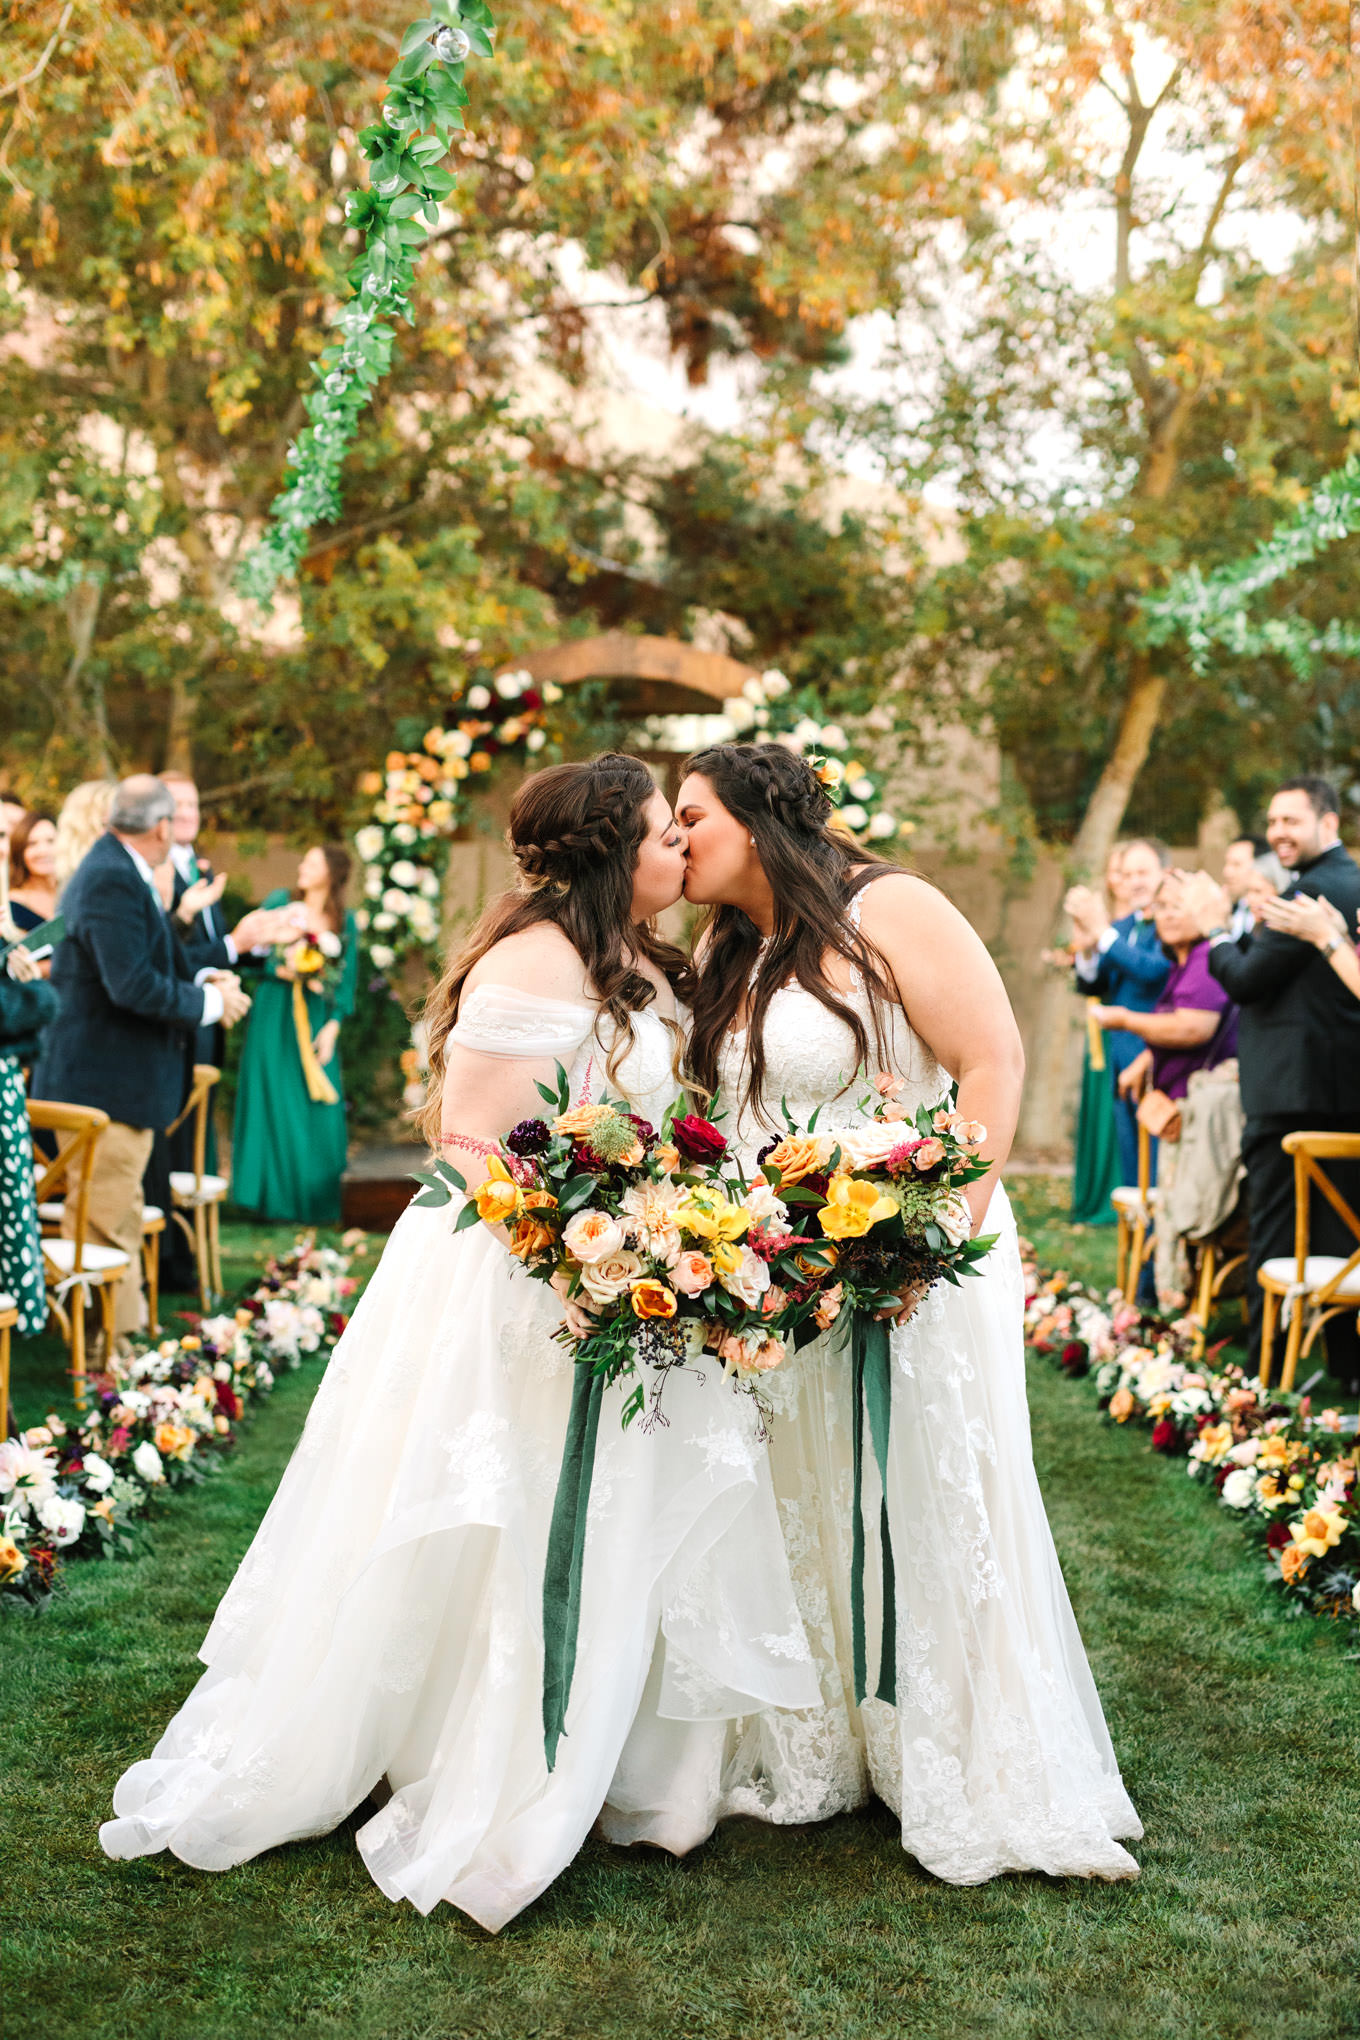 Brides kissing at the end of the aisle in backyard wedding | Engagement, elopement, and wedding photography roundup of Mary Costa’s favorite images from 2020 | Colorful and elevated photography for fun-loving couples in Southern California | #2020wedding #elopement #weddingphoto #weddingphotography   Source: Mary Costa Photography | Los Angeles